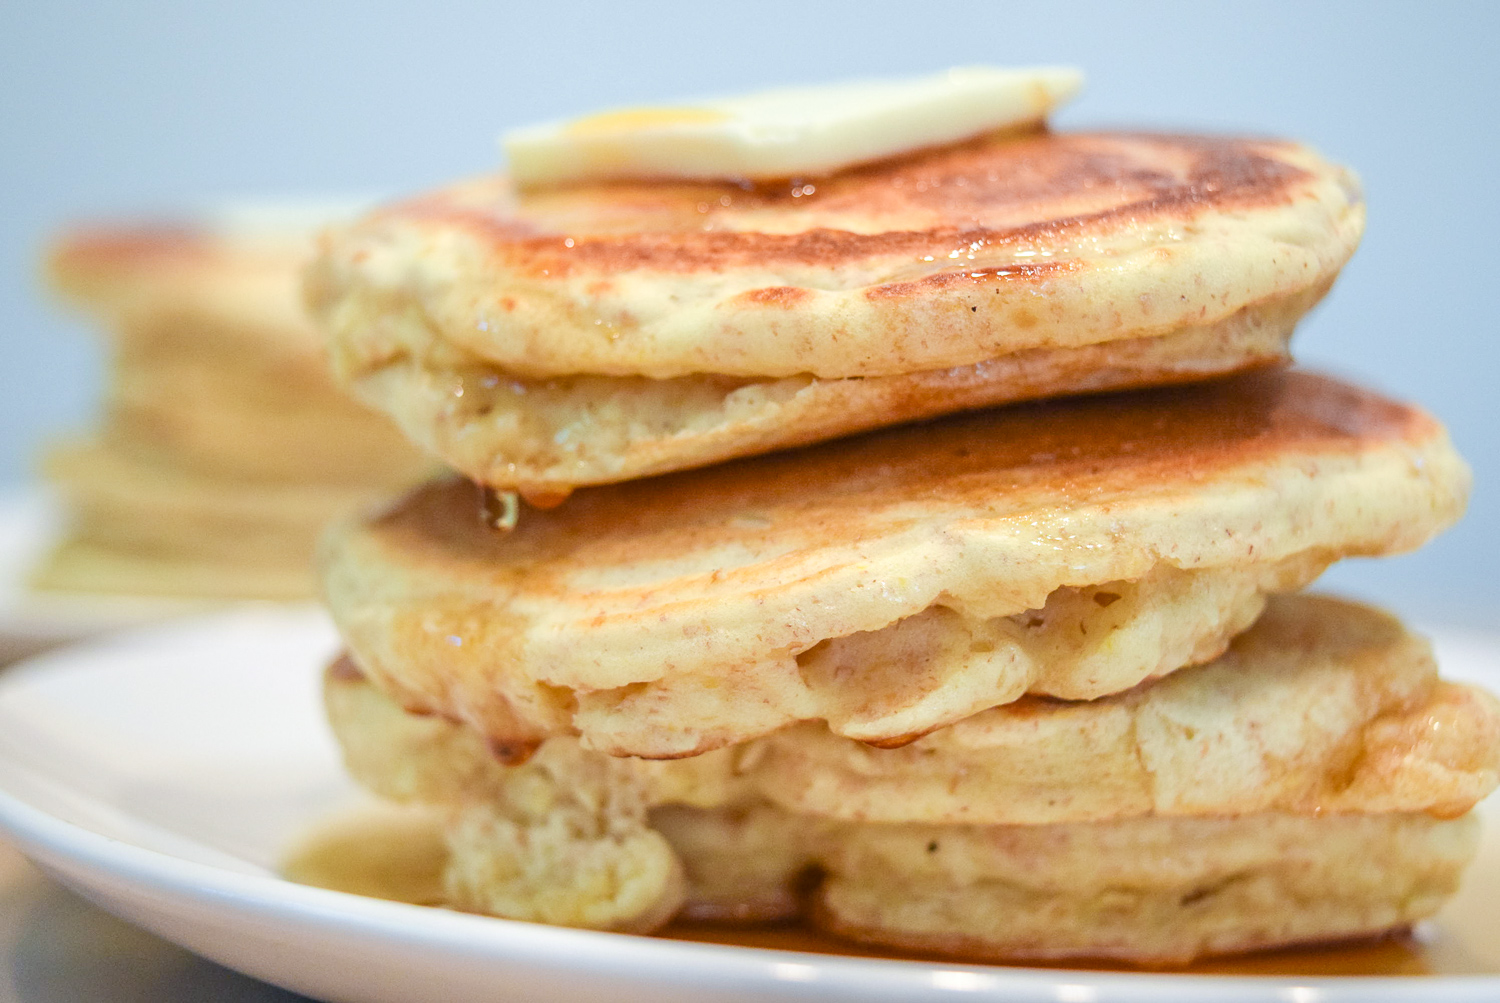 Trader Joe's Multigrain Pancake Mix stacks with butter and maple syrup up close